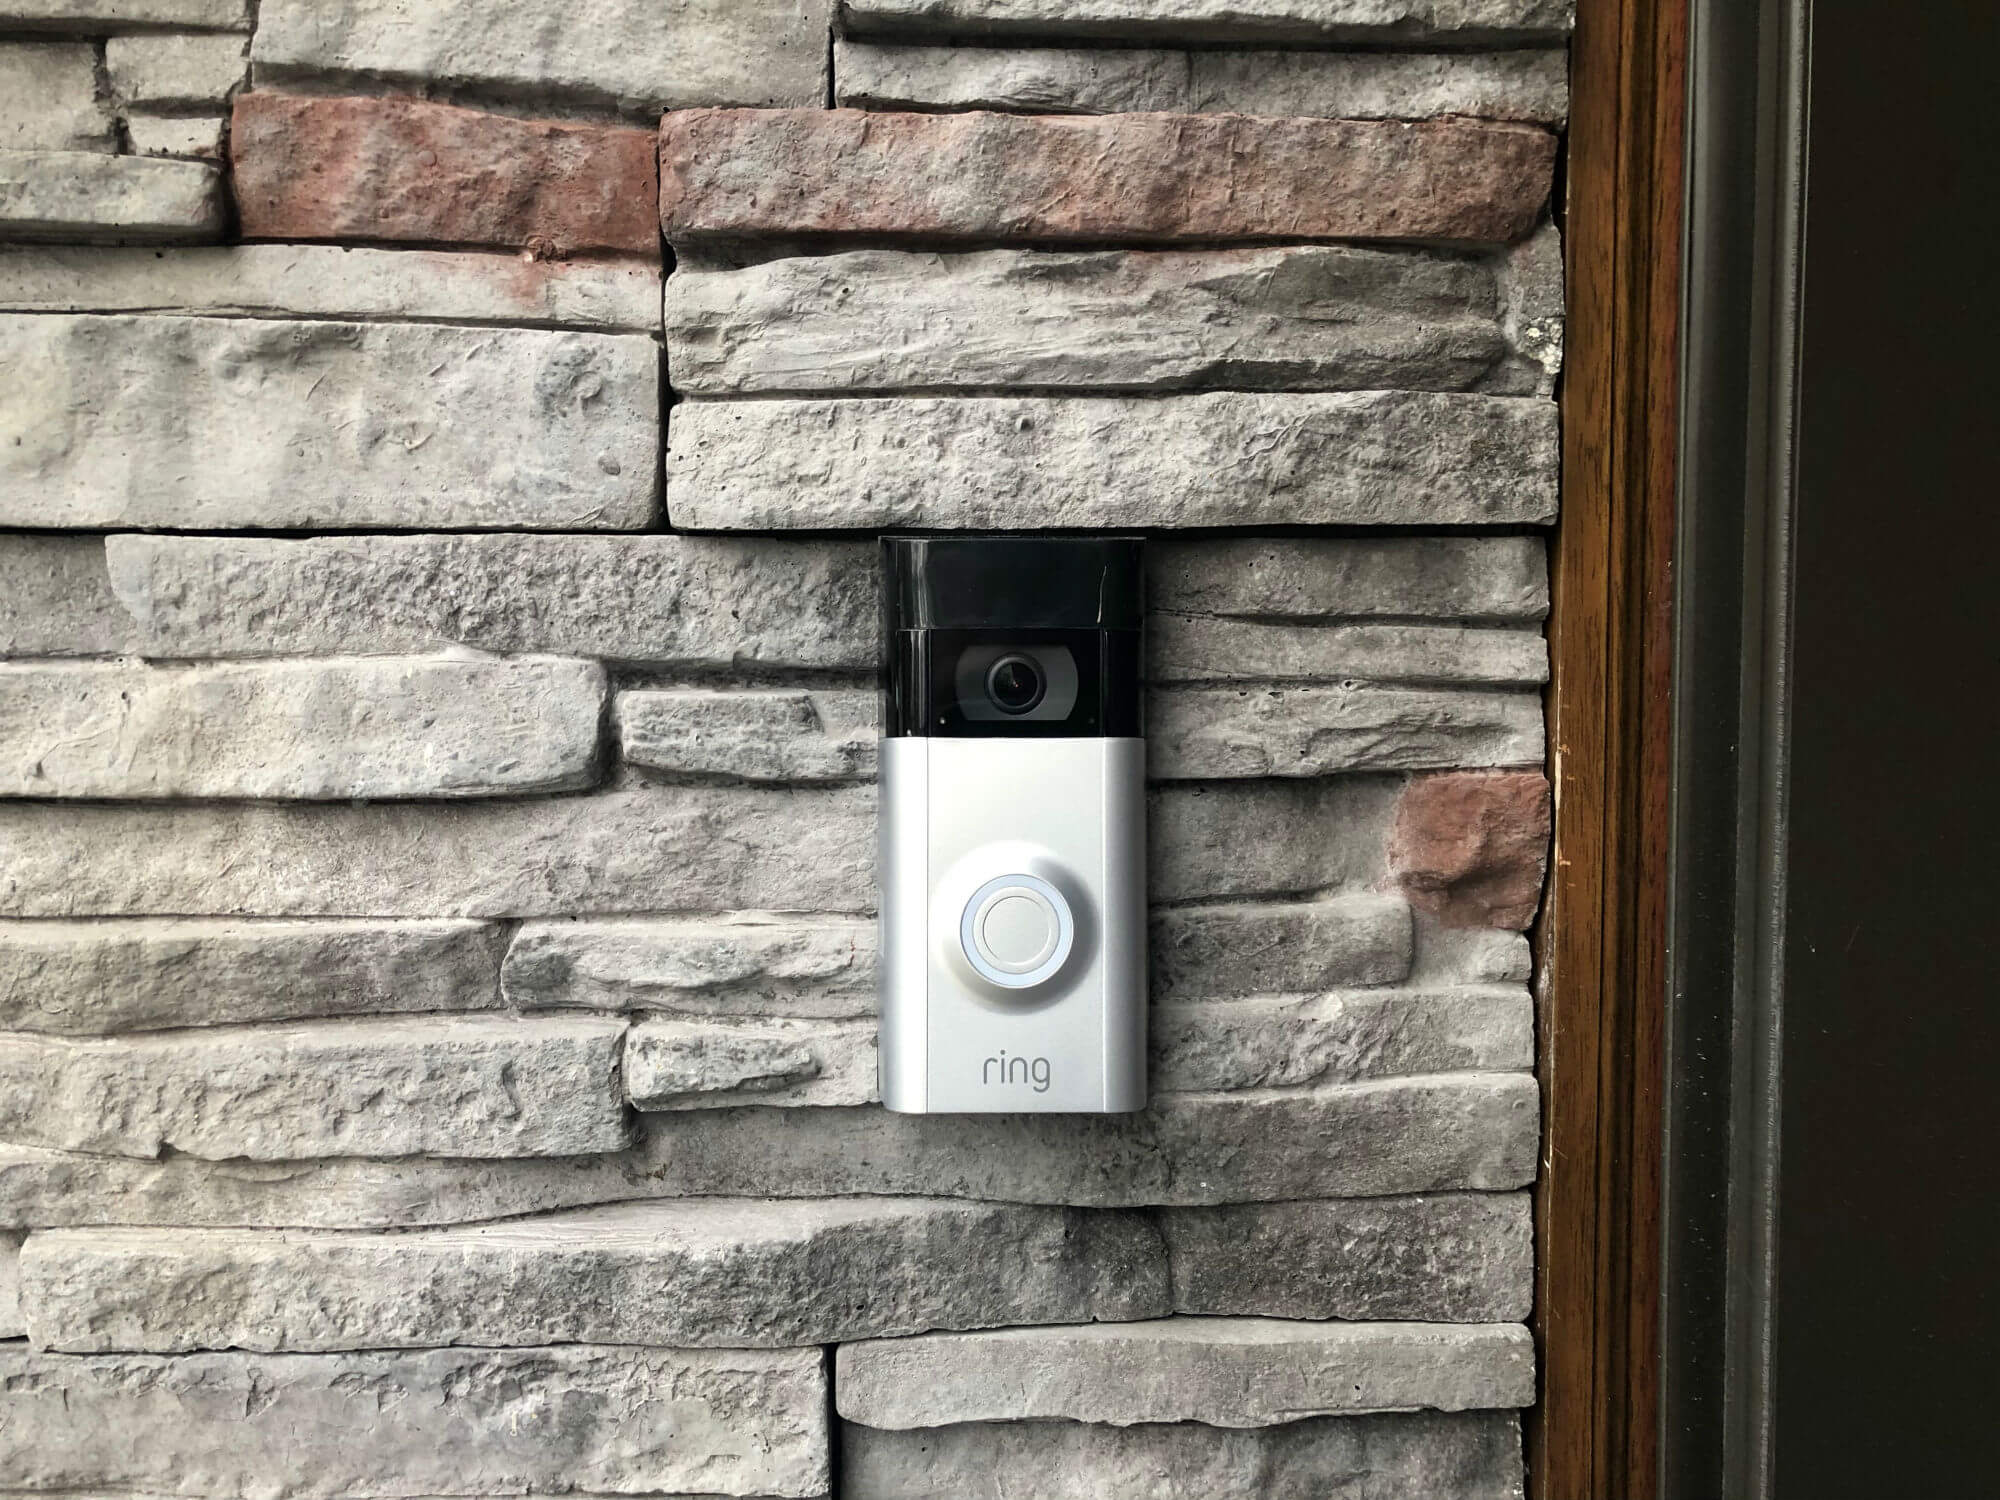 Ring Video Doorbell 2 mounted on a stone wall.